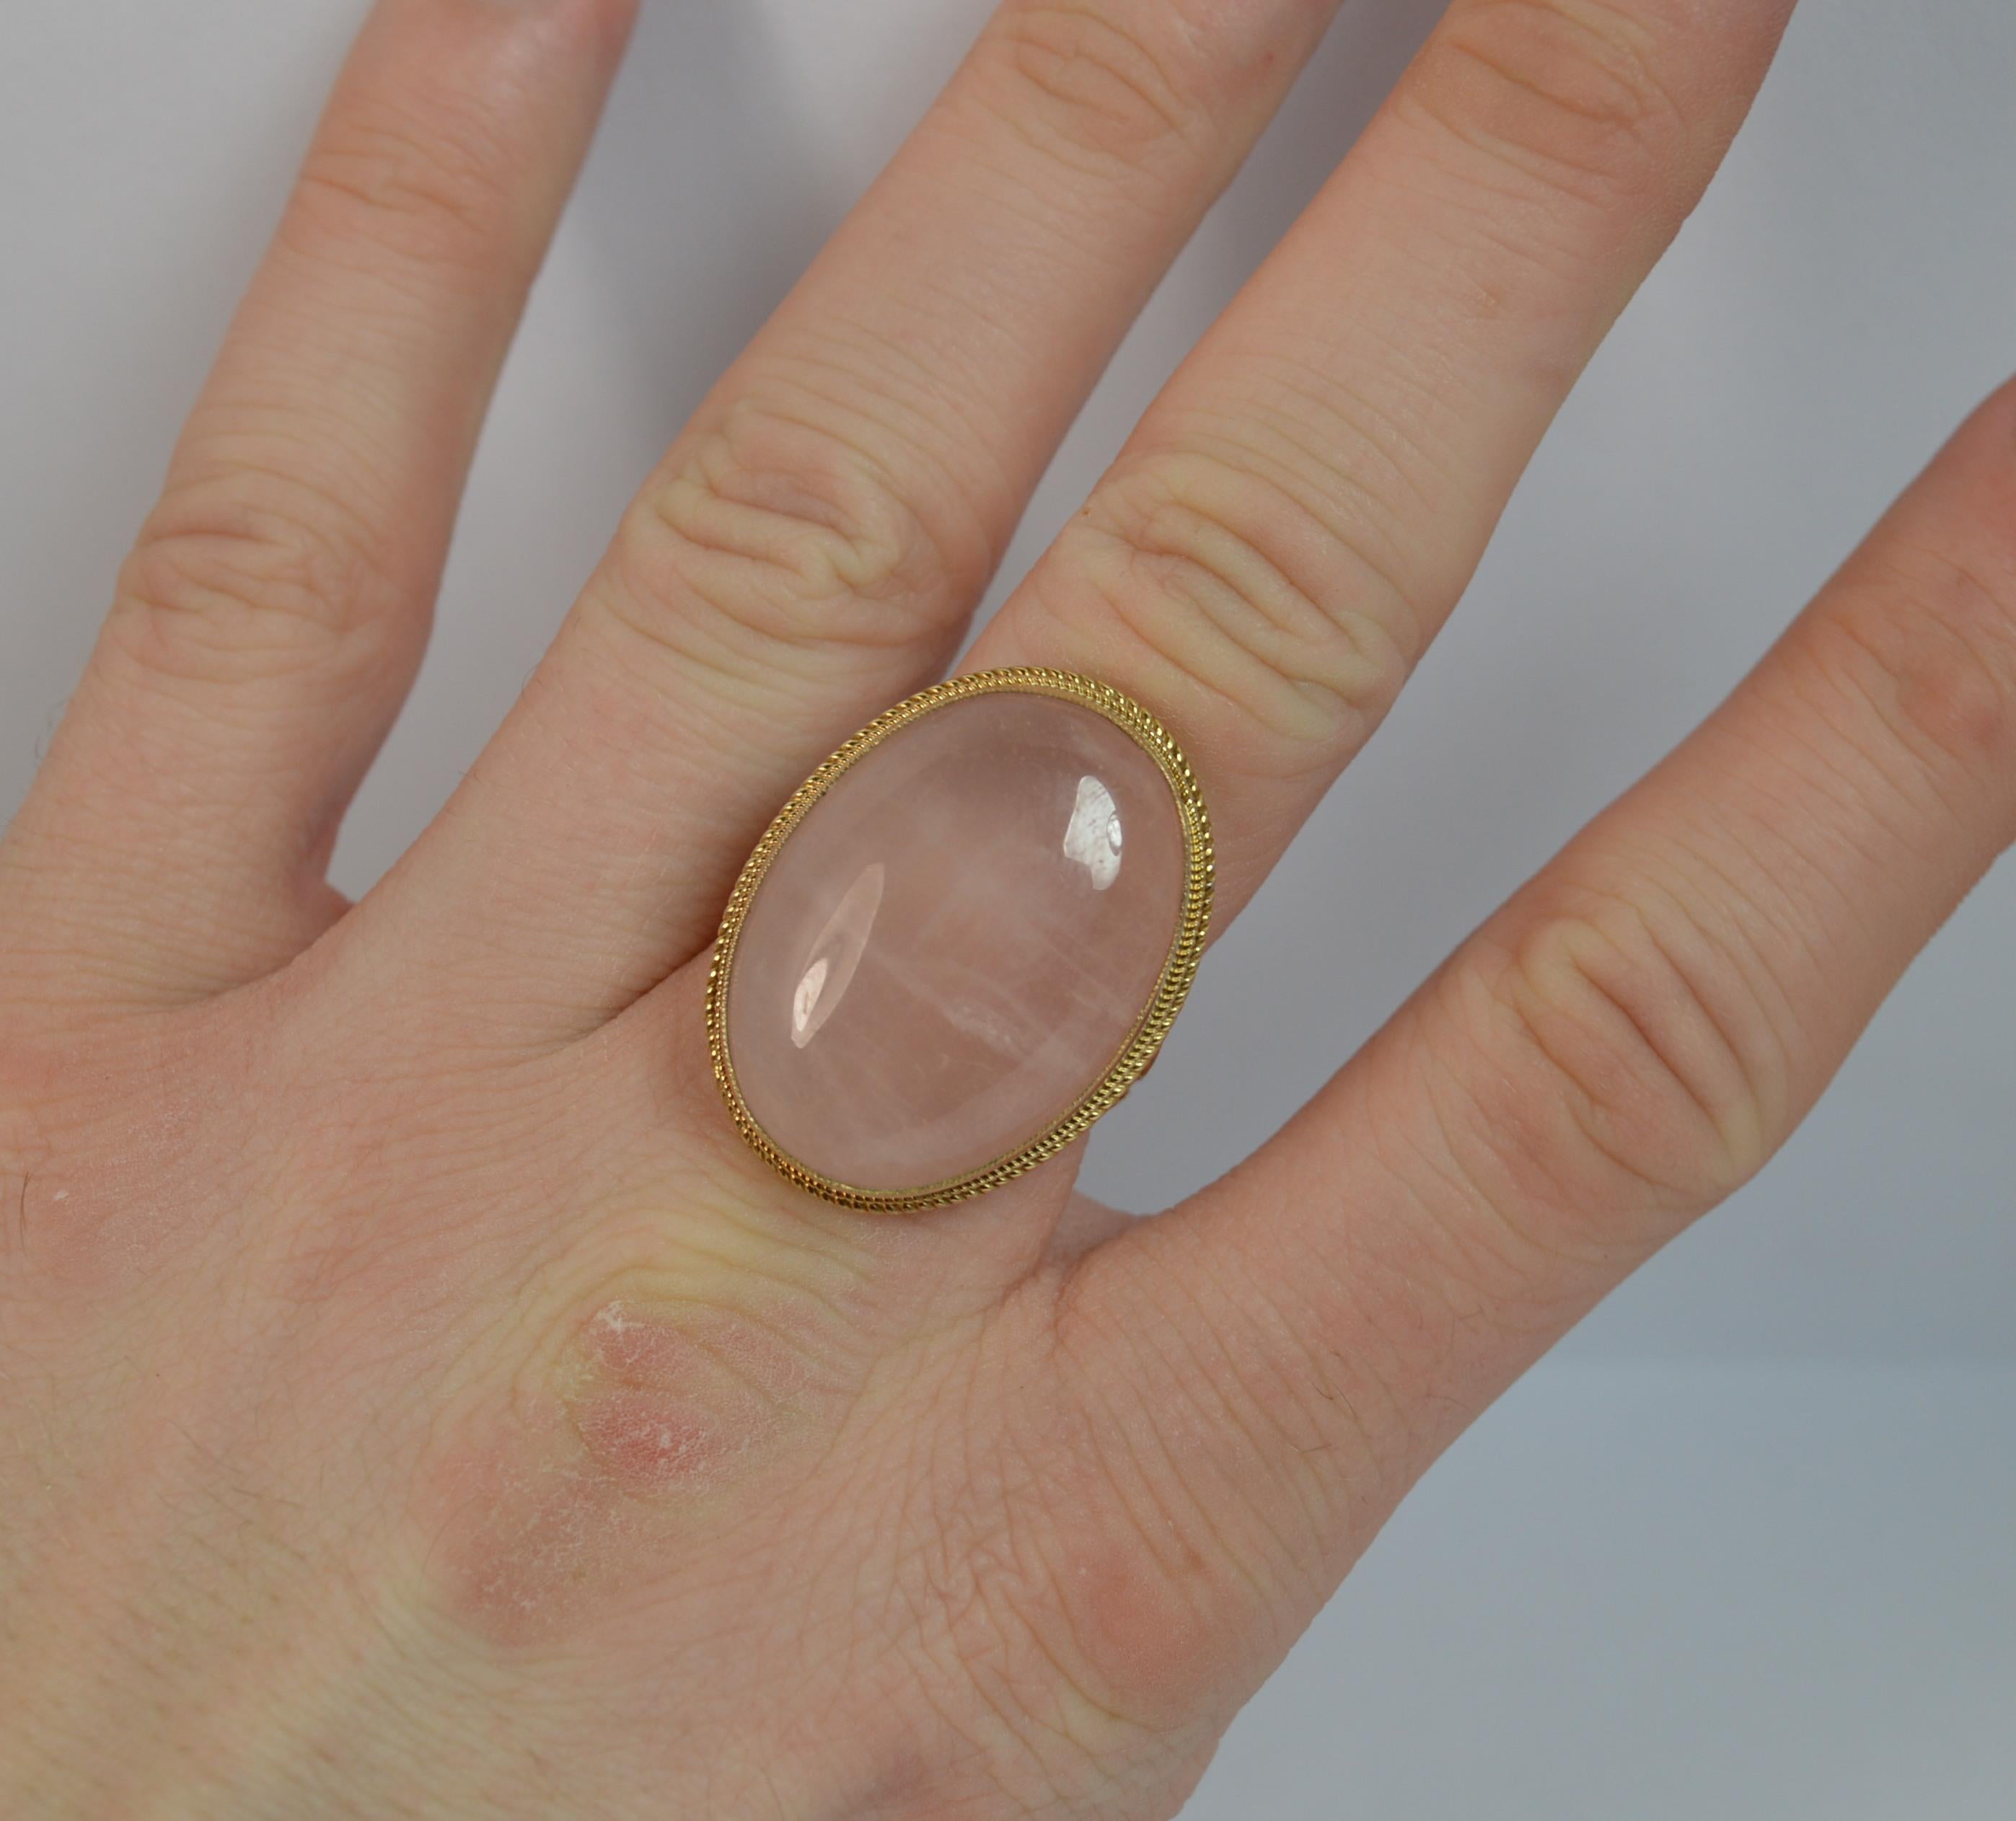 A beautiful ladies 9 carat gold and rose quartz ring.
Size ; P 1/2 UK, 8 US
18mm x 25mm rose quartz with gold twist surround. 9mm off the finger.

Large statement example.

Condition ; Excellent. Well set stones. Clean, strong, round band. Issue